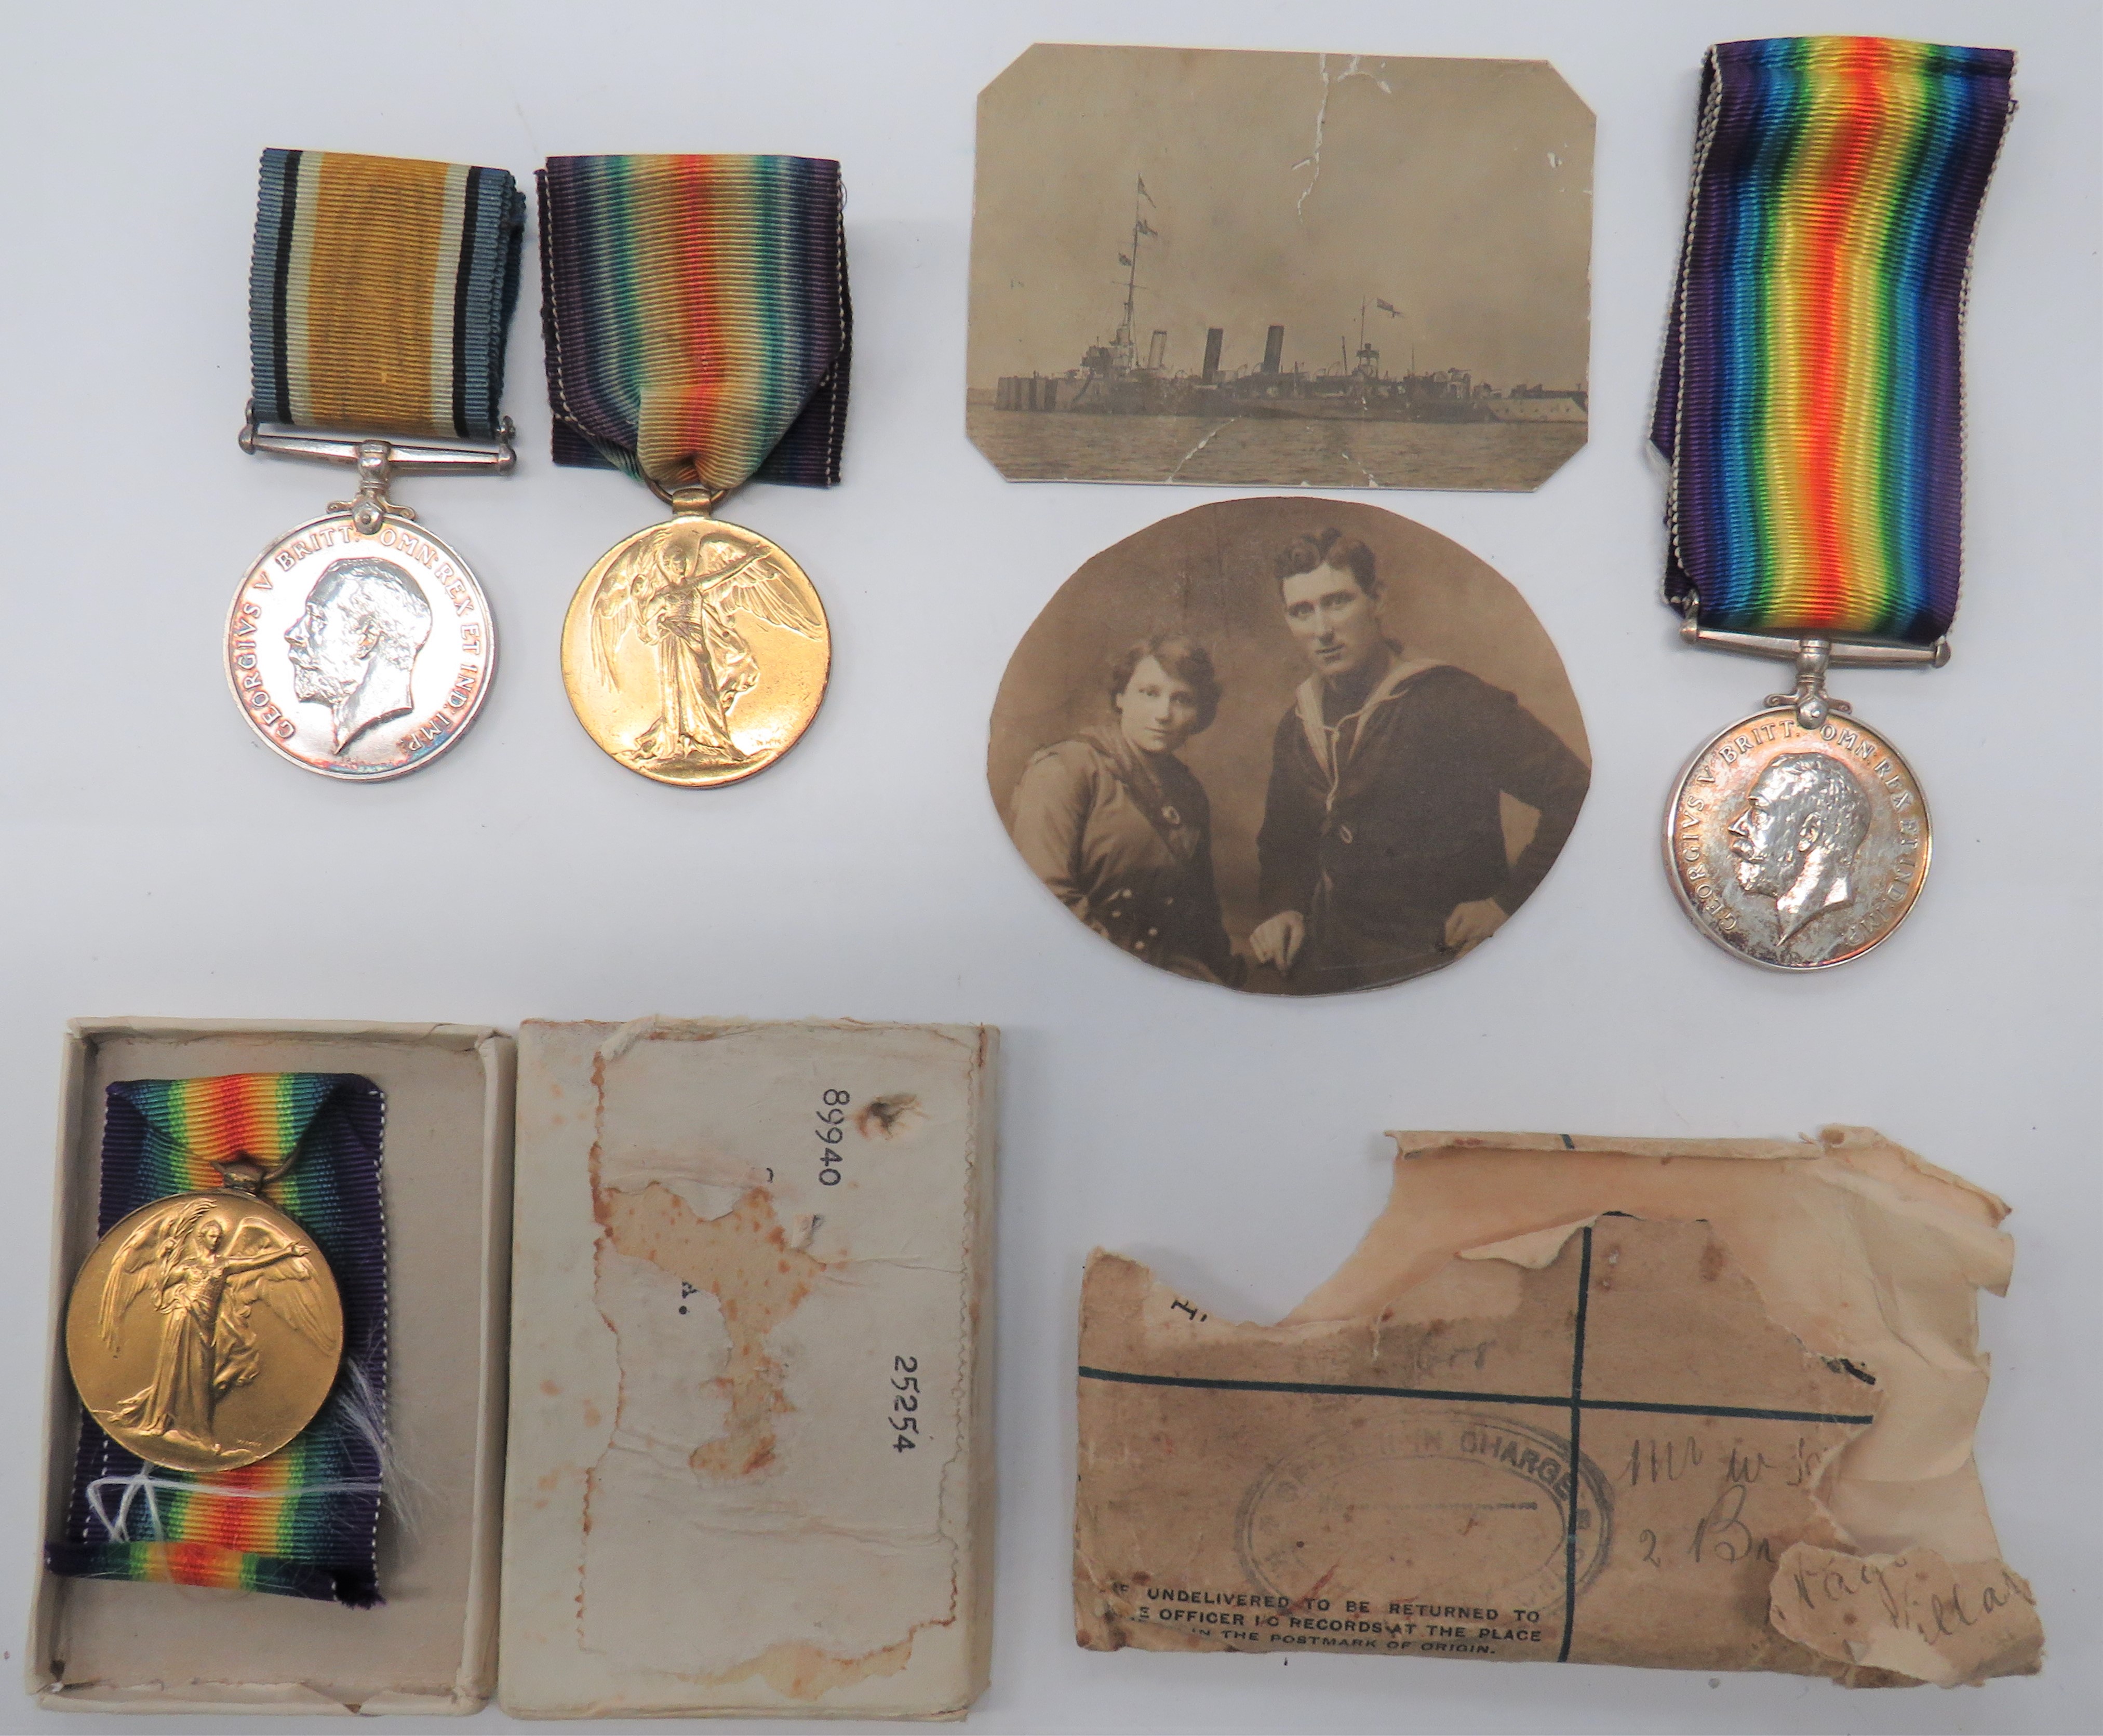 WW1 Royal Navy Pair consisting silver War medal and Victory named "K. 5058 G. F. Smith Sto.1 RN"